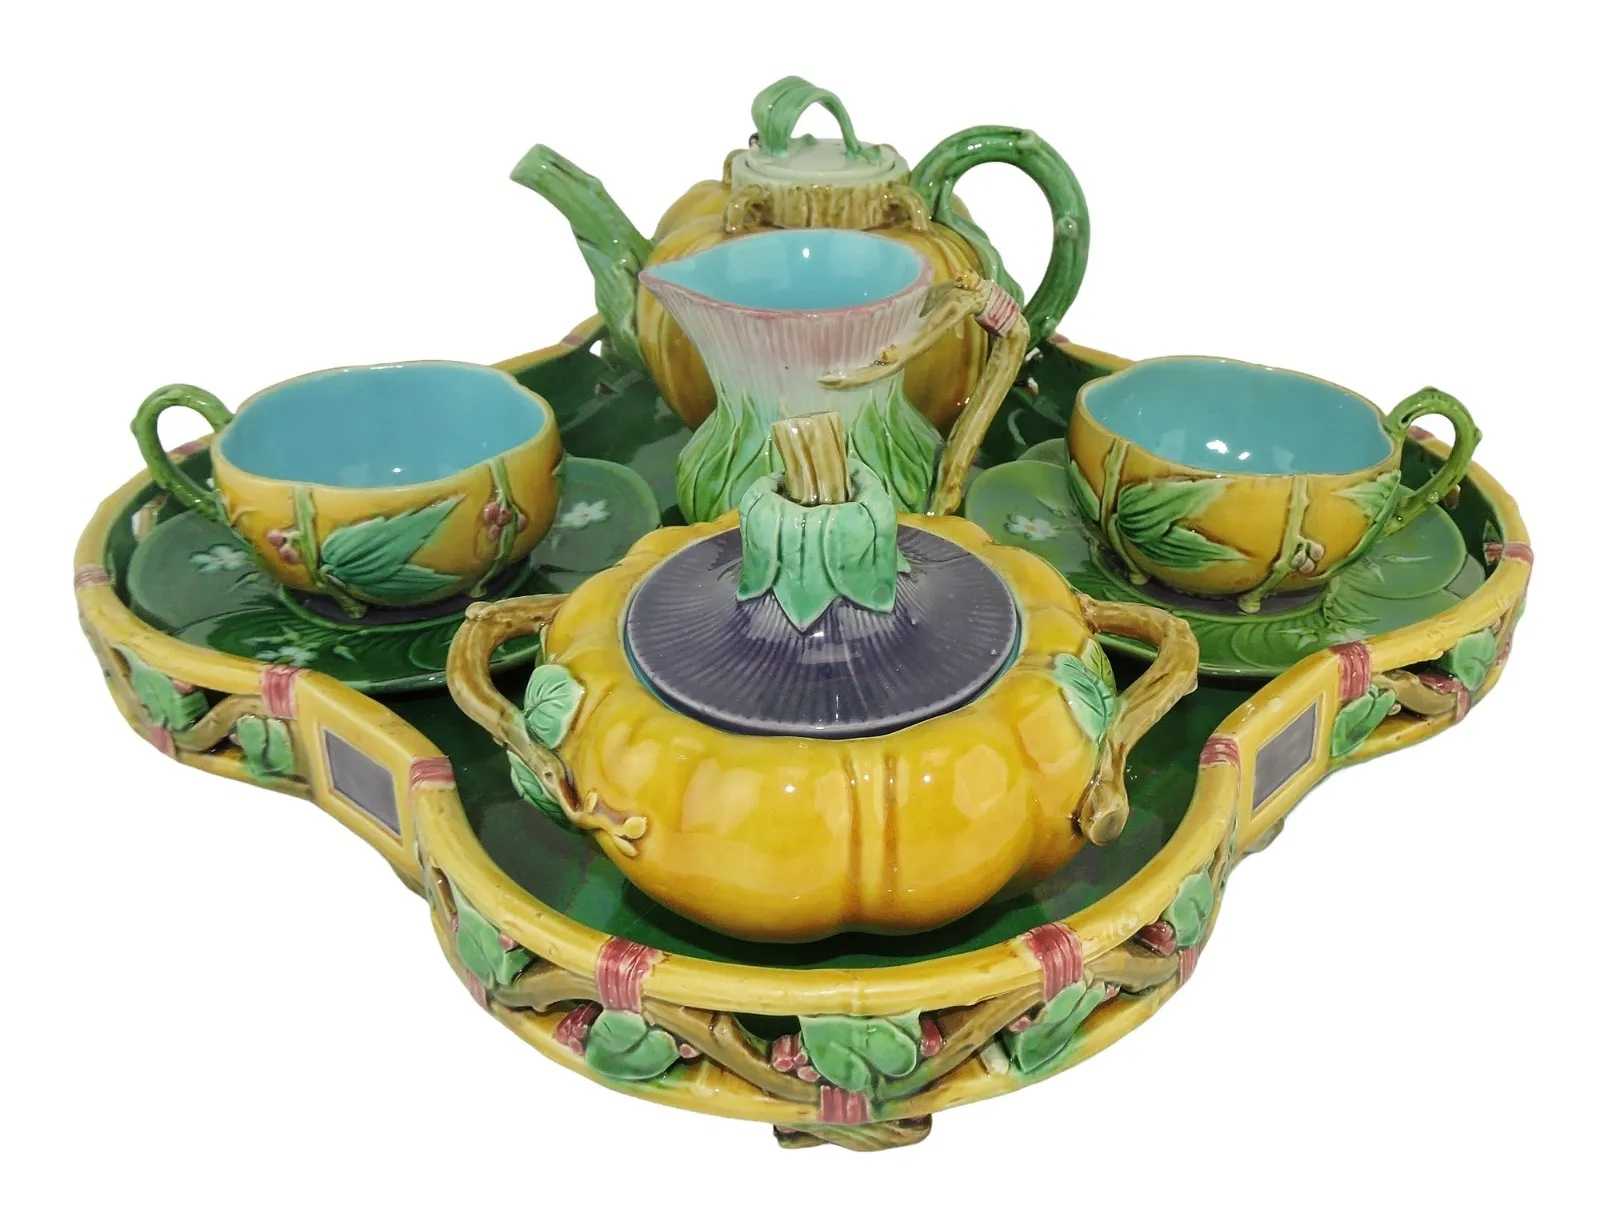 Minton Majolica tete-a-tete, which sold for $25,000 ($31,000 with buyer’s premium) at Strawser.